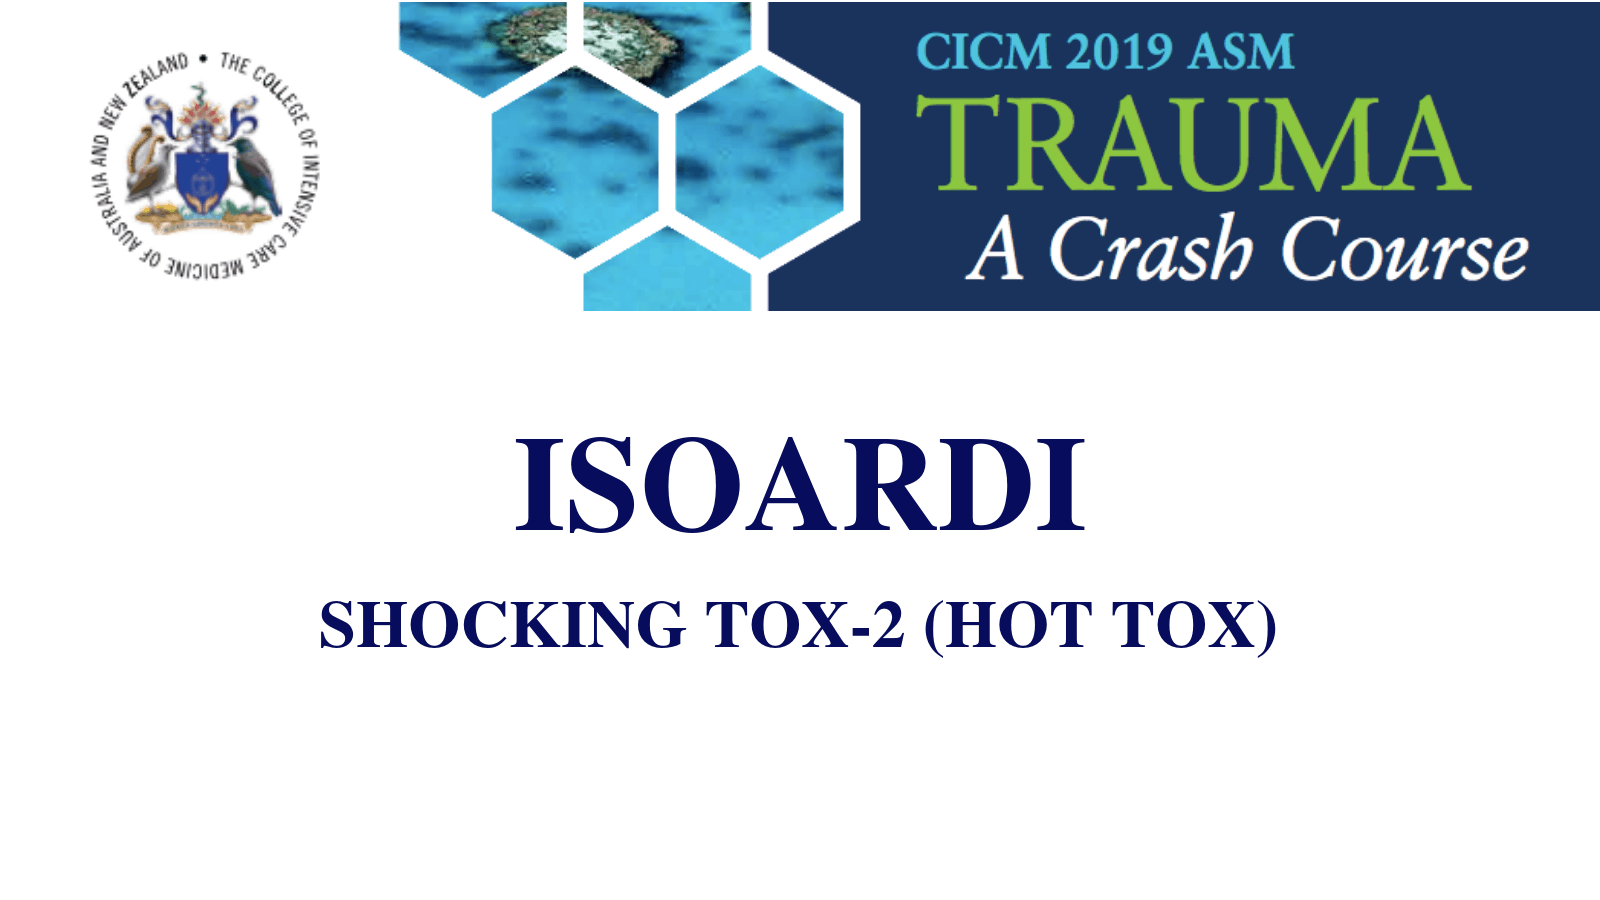 Shocking tox-2 (Hot Tox)